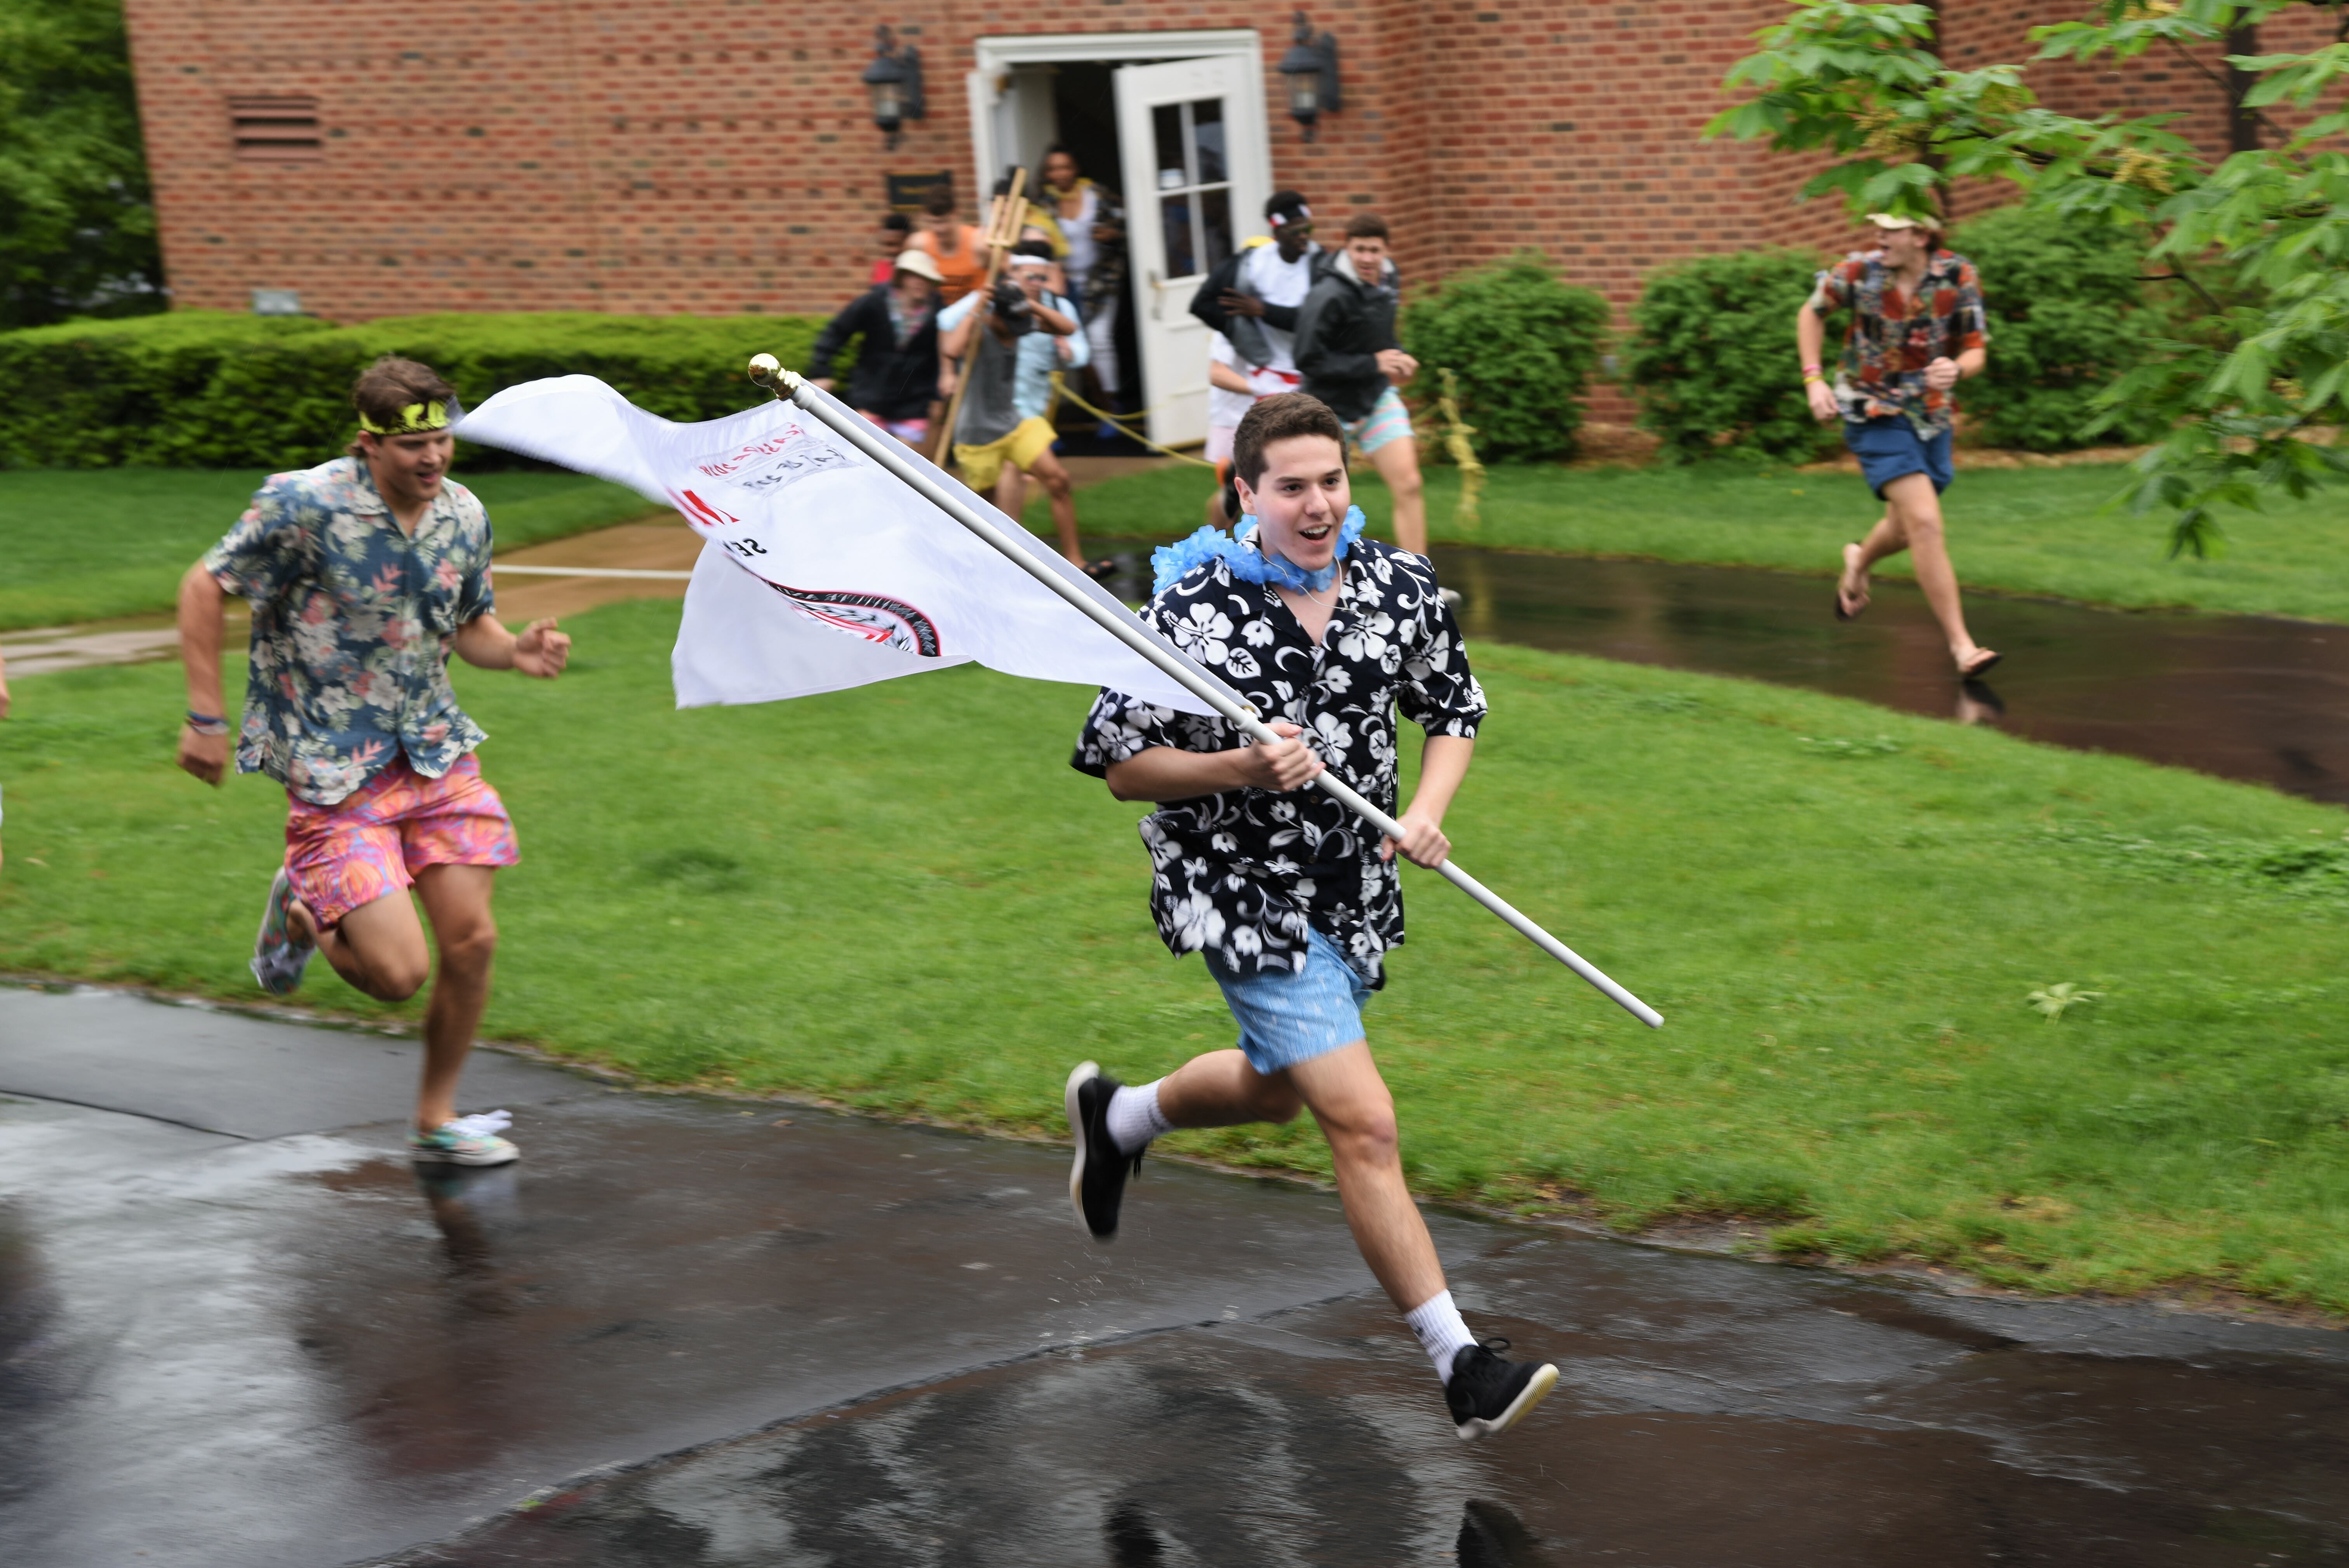 MICDS Class of 2019 took a final tour of campus as students on their last day, and were celebrated by faculty, staff and their younger classmates.